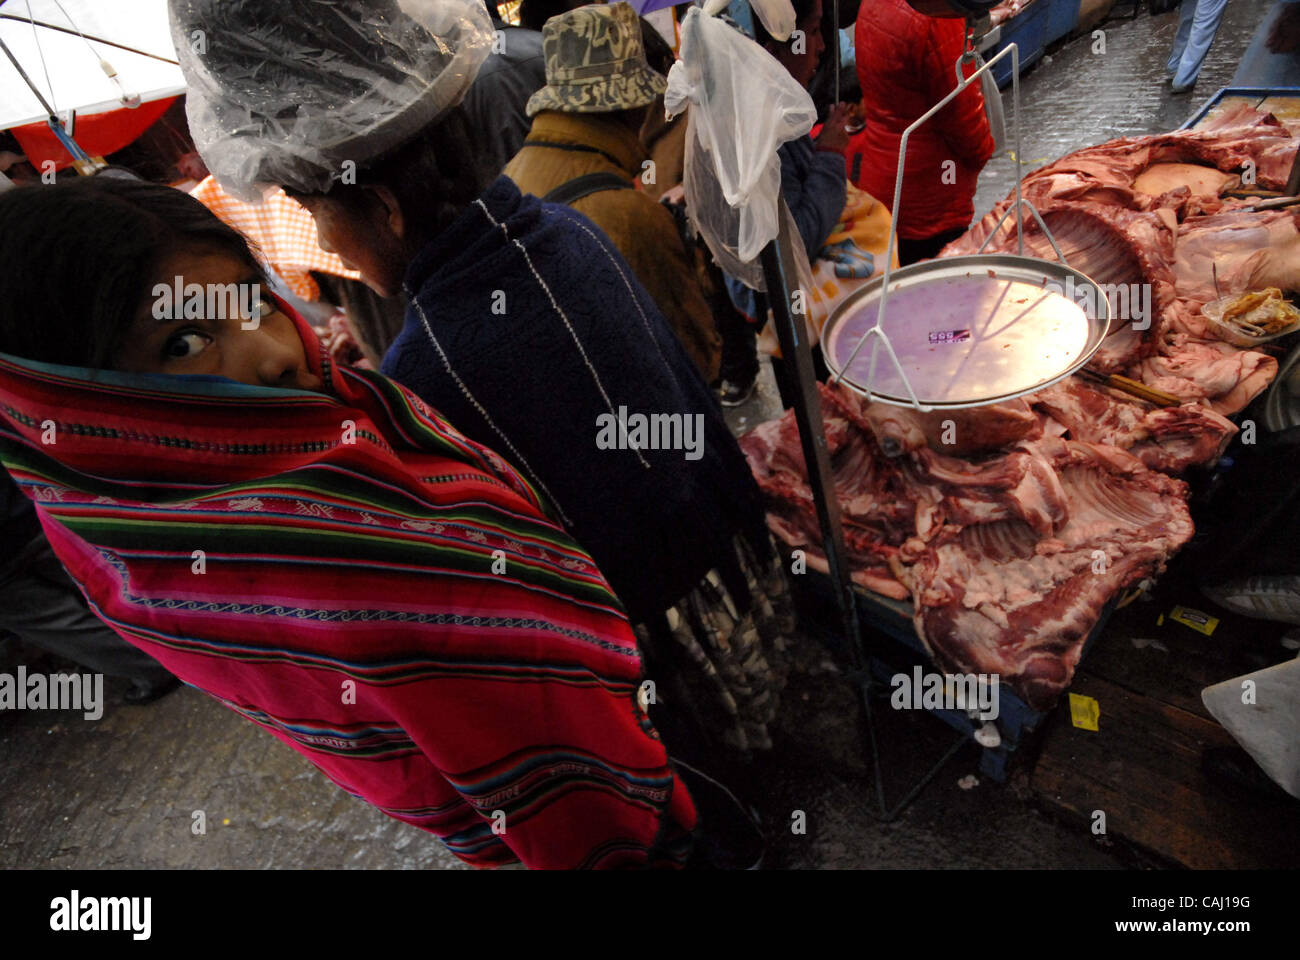 Dec 31, 2007 - La Paz, Bolivia - A young indigenous girl waits to buy her pork meat in La Paz Garita de Lima's street market. Every 31st December in La Paz, thousands of dead pigs are brought to the city to be sold, coming from Cochabamba, Santa Cruz and all La Paz areas. The bolivian tradition to e Stock Photo